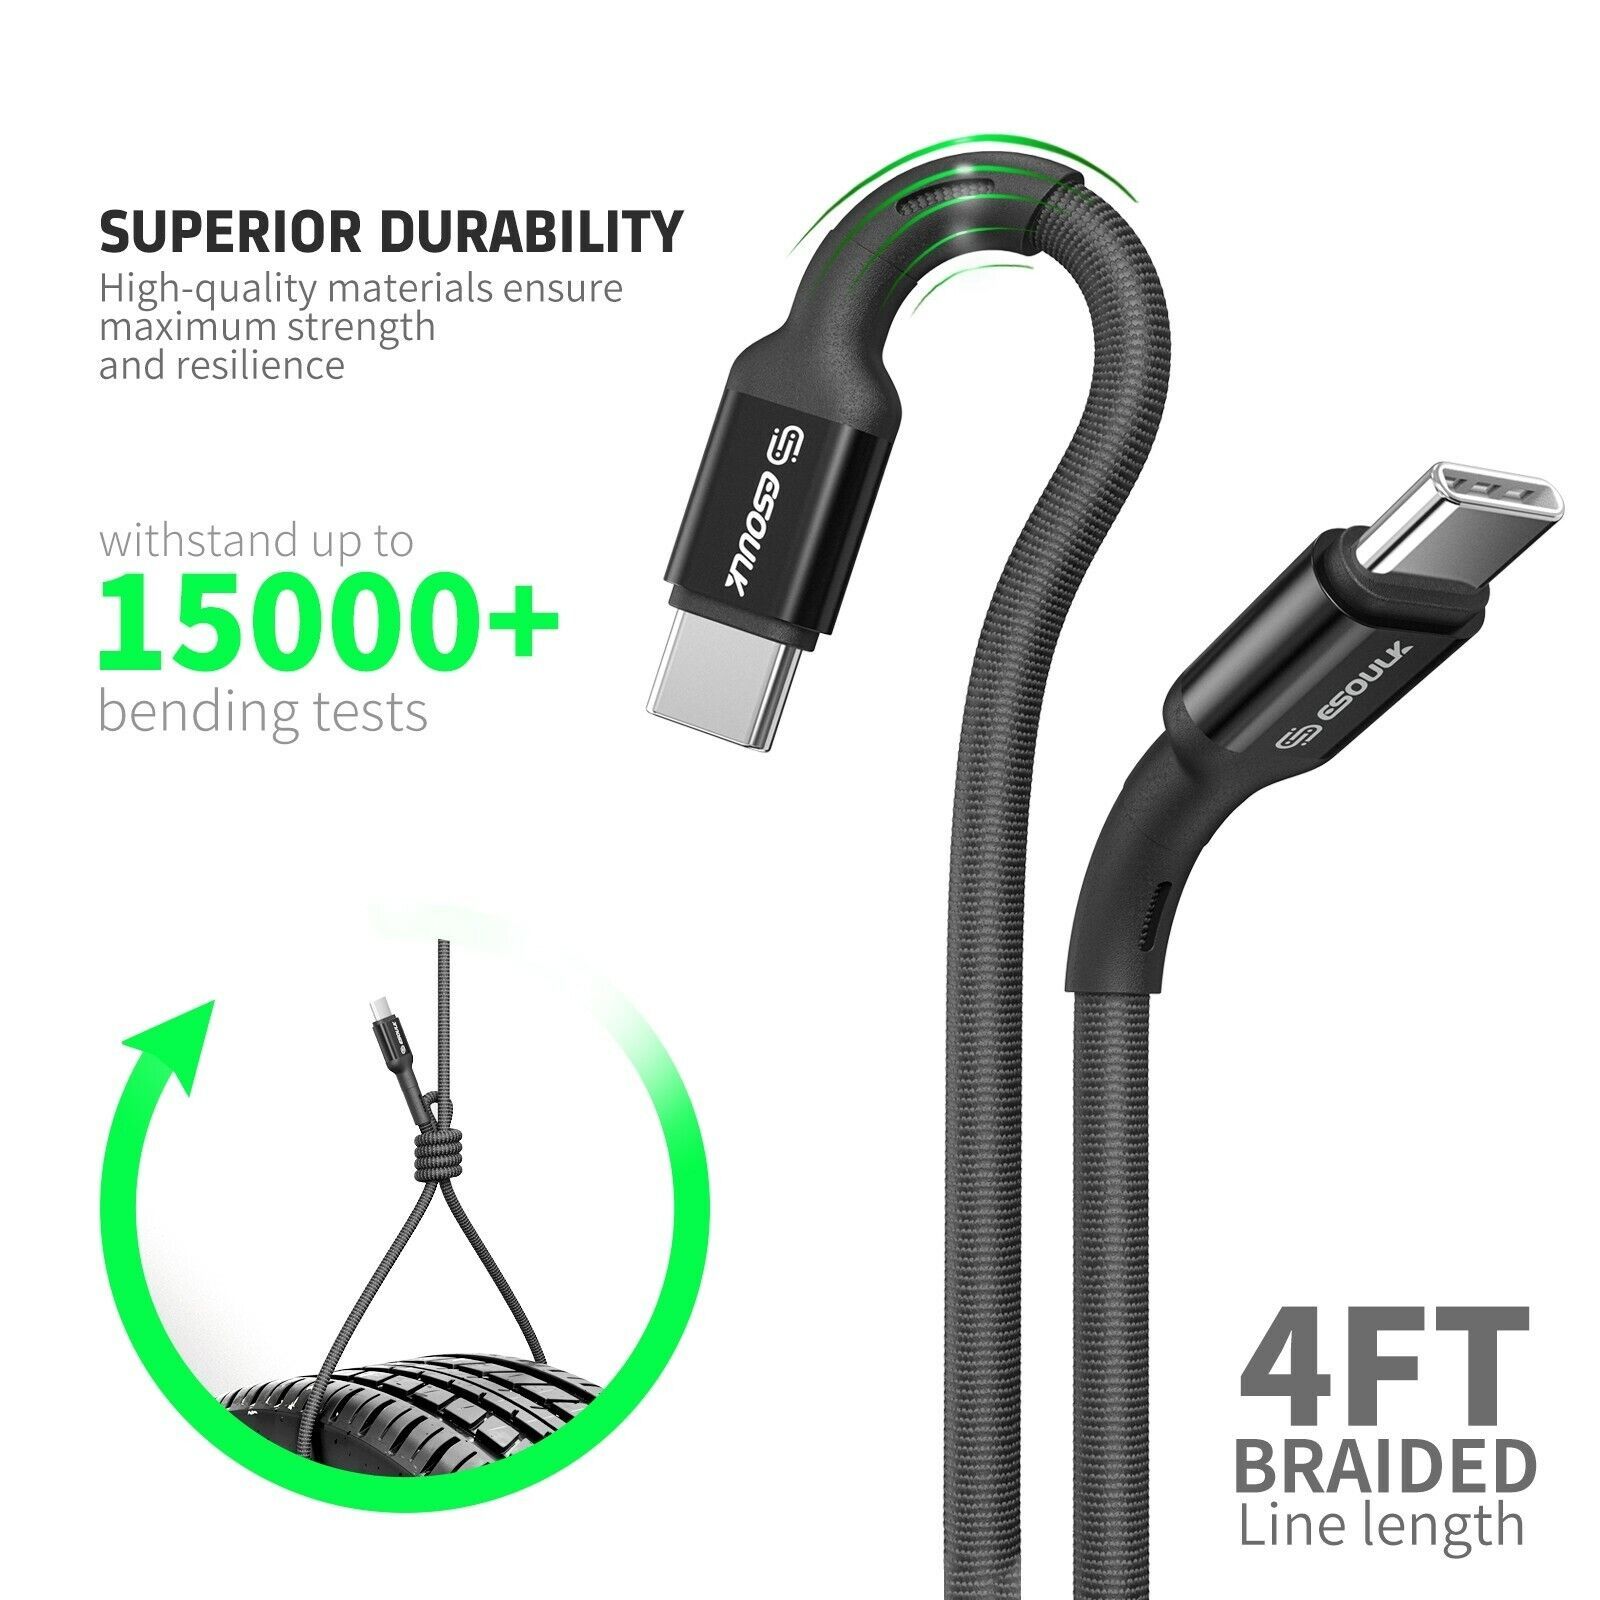 4FT Type C to C Fast Charge Cable For Blackview BL-8800 BL8800 Pro - $9.85